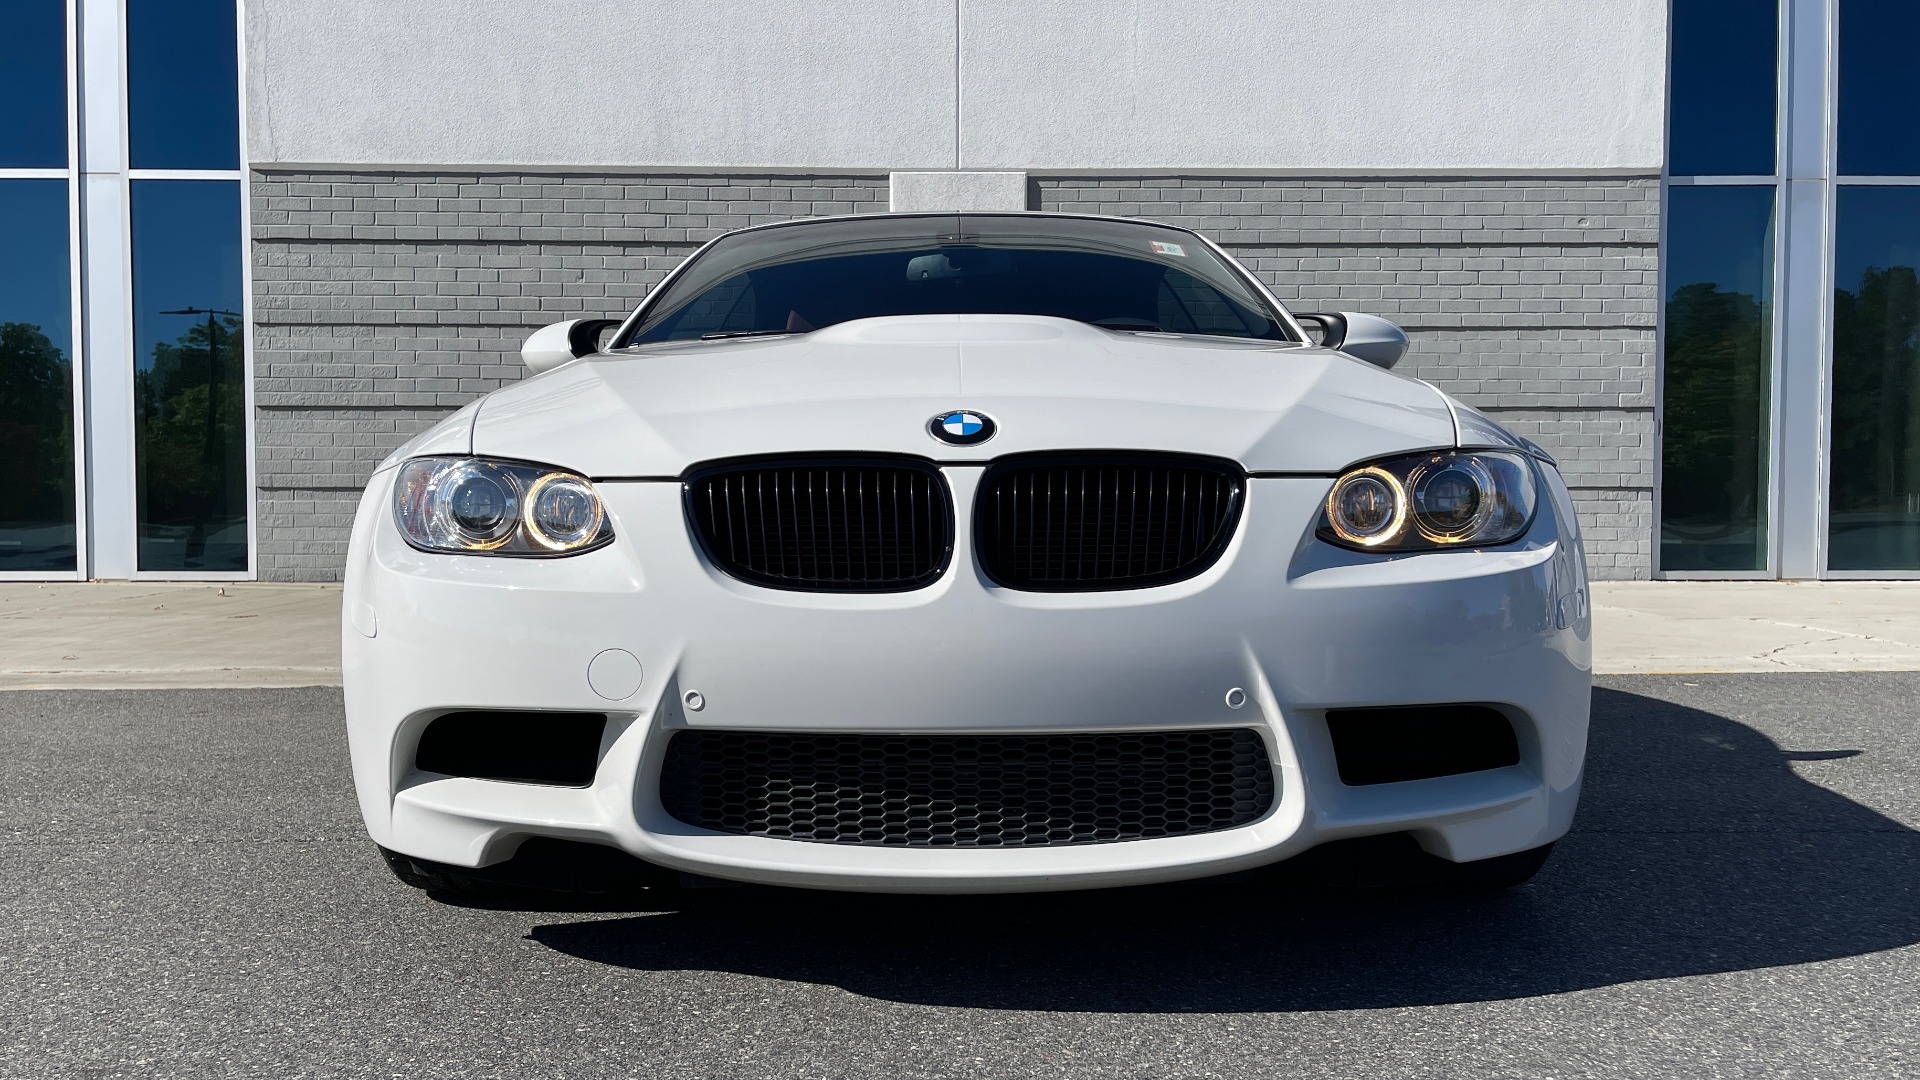 Used 2012 BMW M3 CONVERTIBLE / SC 4.0L V8 / 6-SPD MANUAL / NAV / HTD STS / SIRIUSXM for sale Sold at Formula Imports in Charlotte NC 28227 24